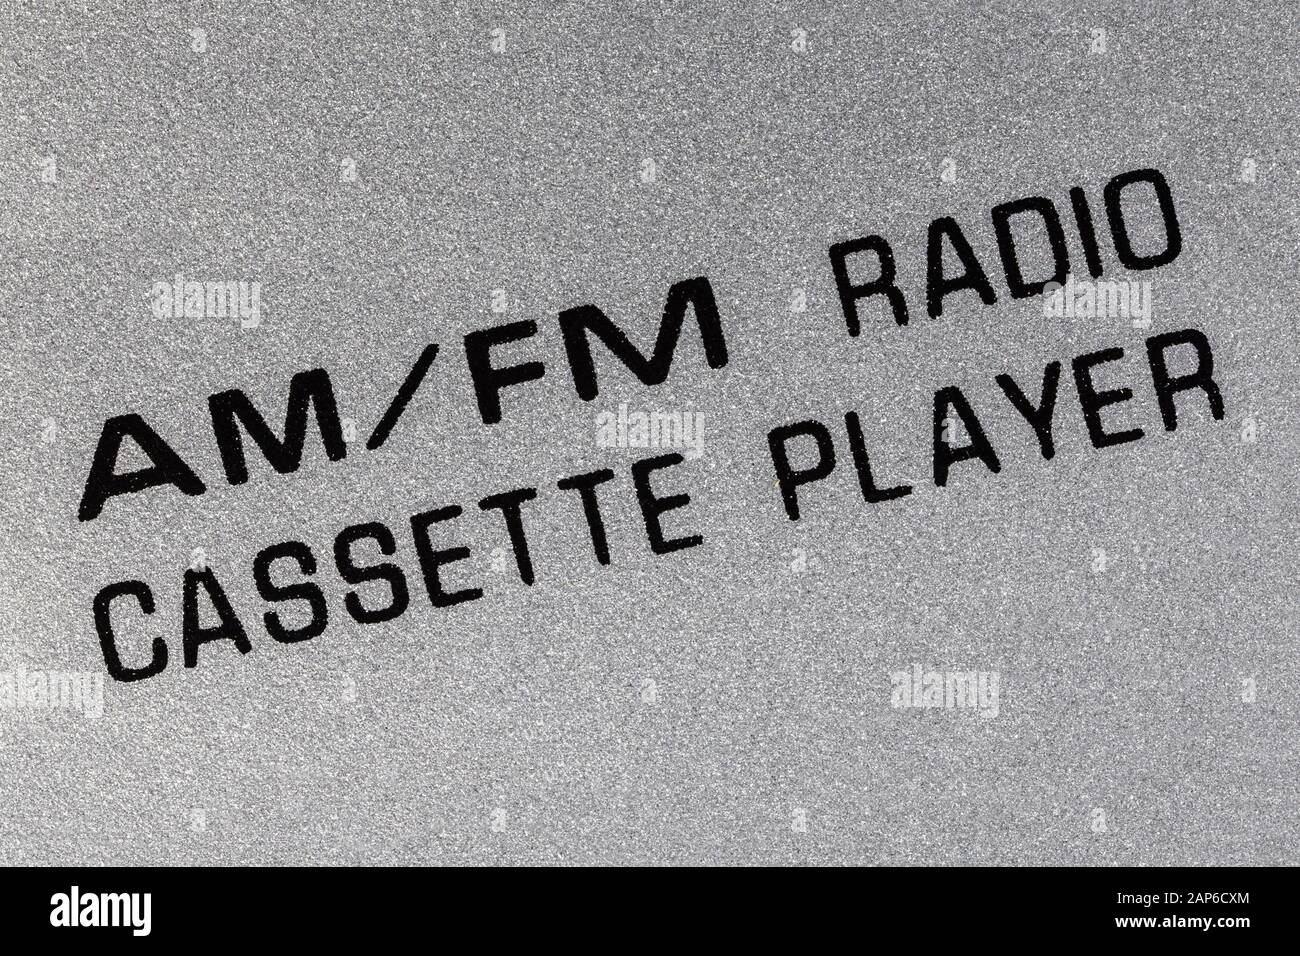 Macro close up photograph of AM FM Radio Cassette Player detail on vintage boombox. Stock Photo